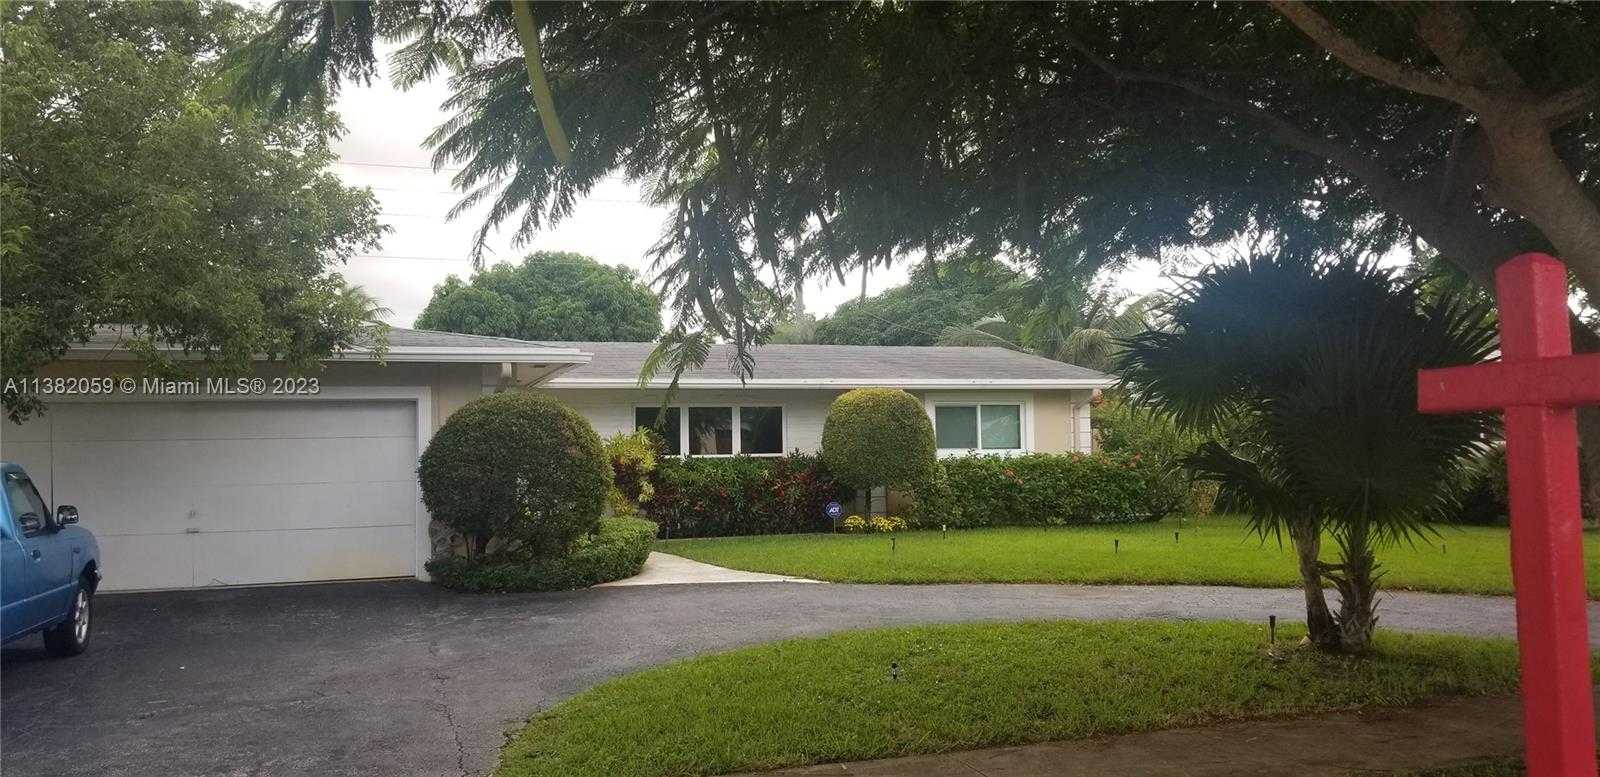 House in Hollywood, Florida 11708460